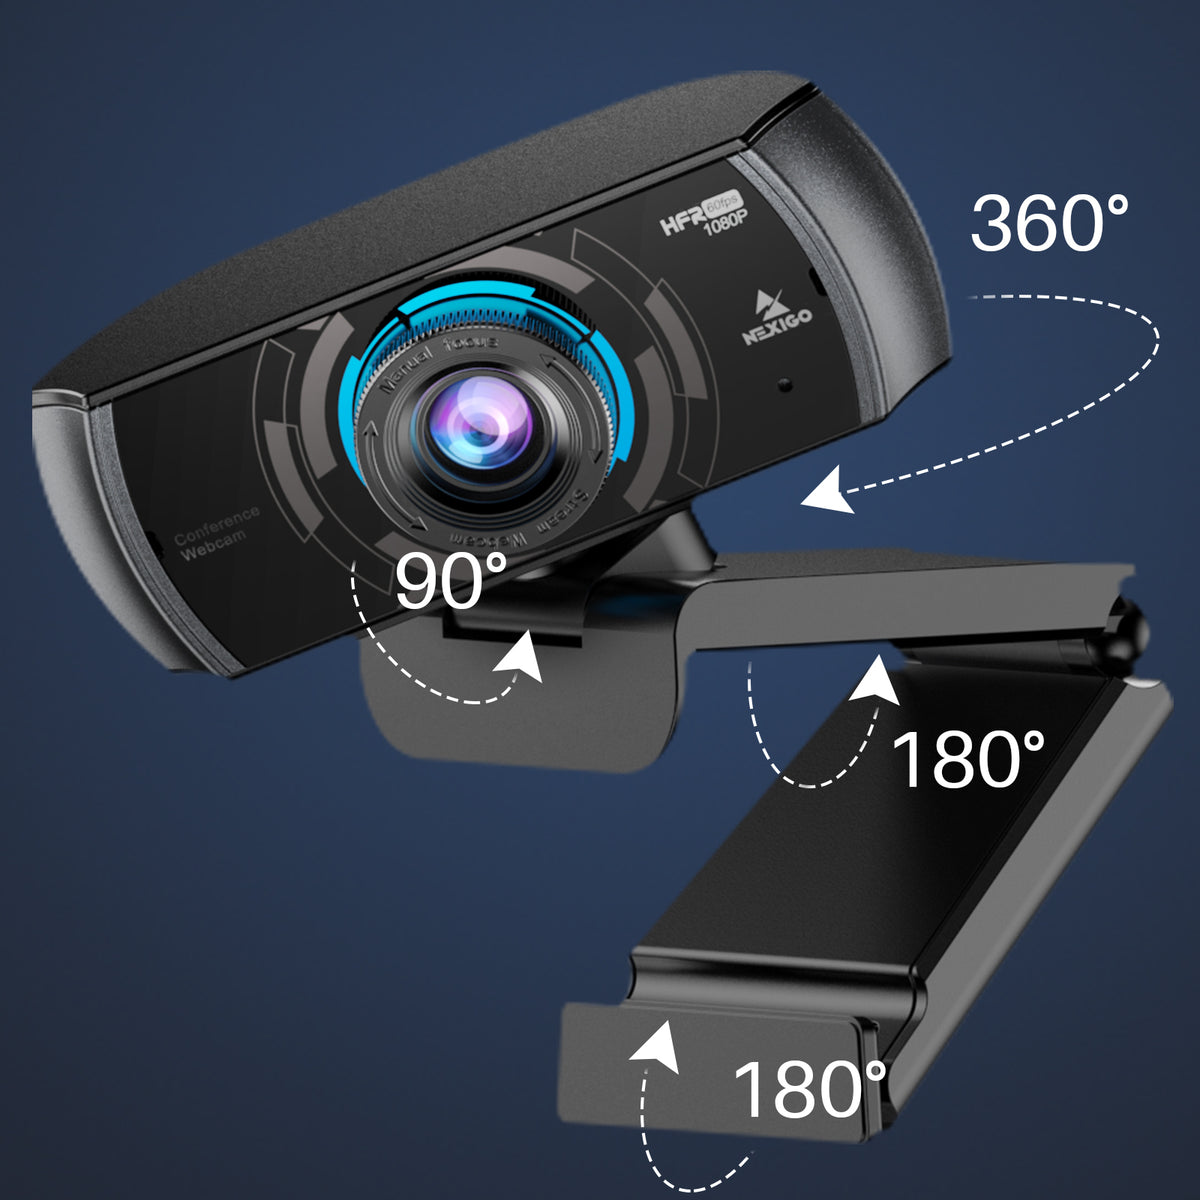 Webcam rotates 360° left/right; camera clip can open up to 180°.